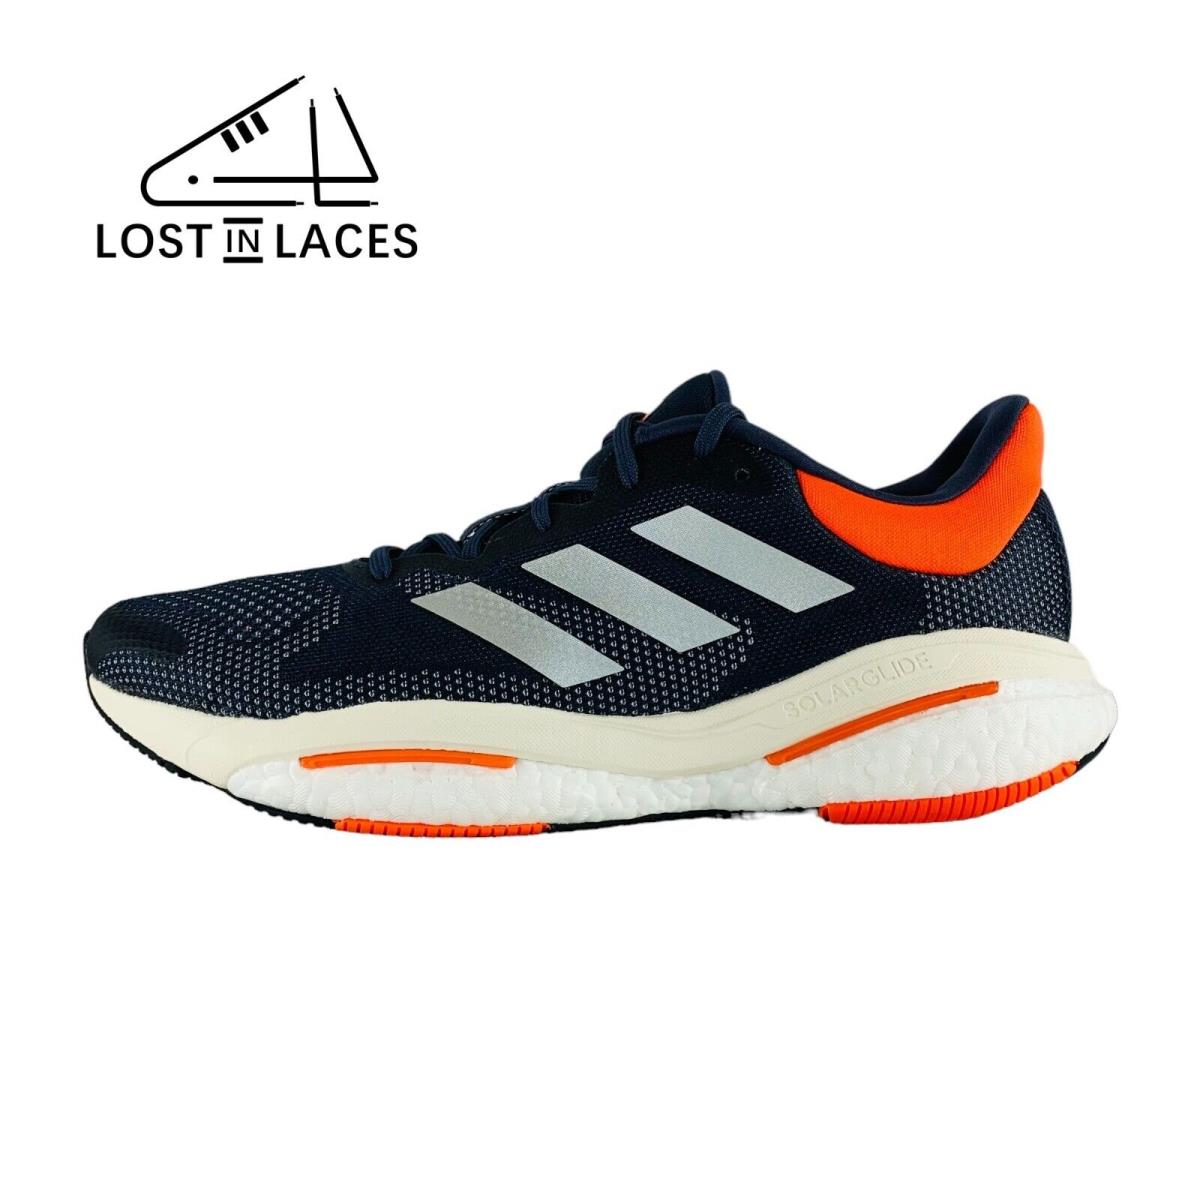 Adidas Solarglide 5 Shadow Navy Orange Sneakers Running Shoes Men`s Sizes